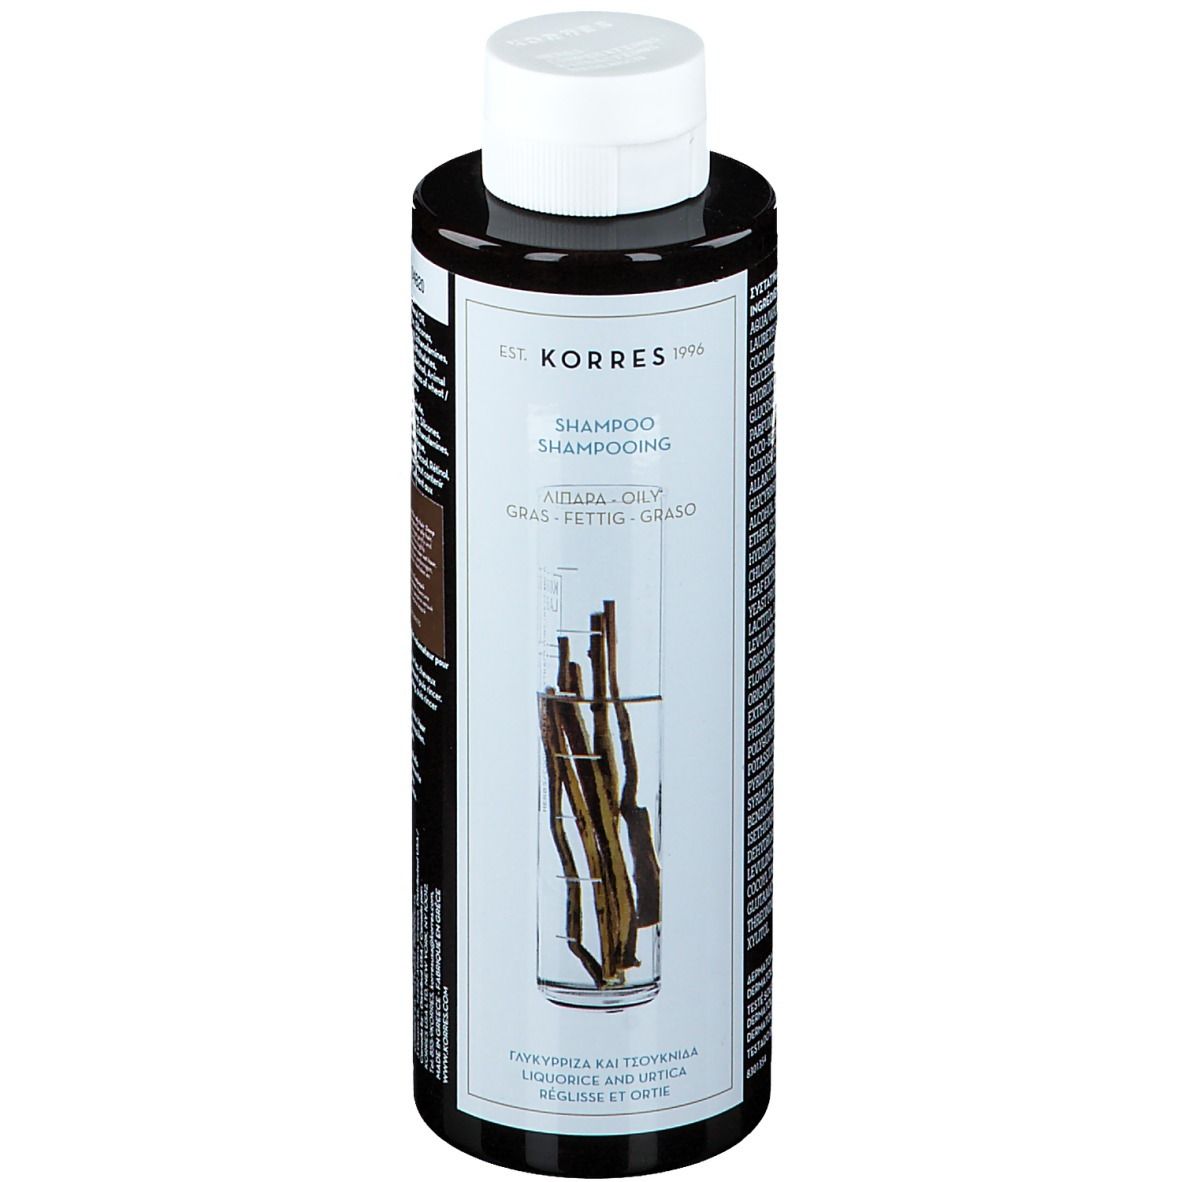 Korres Shampooing Purifiant Reglisse & ortie